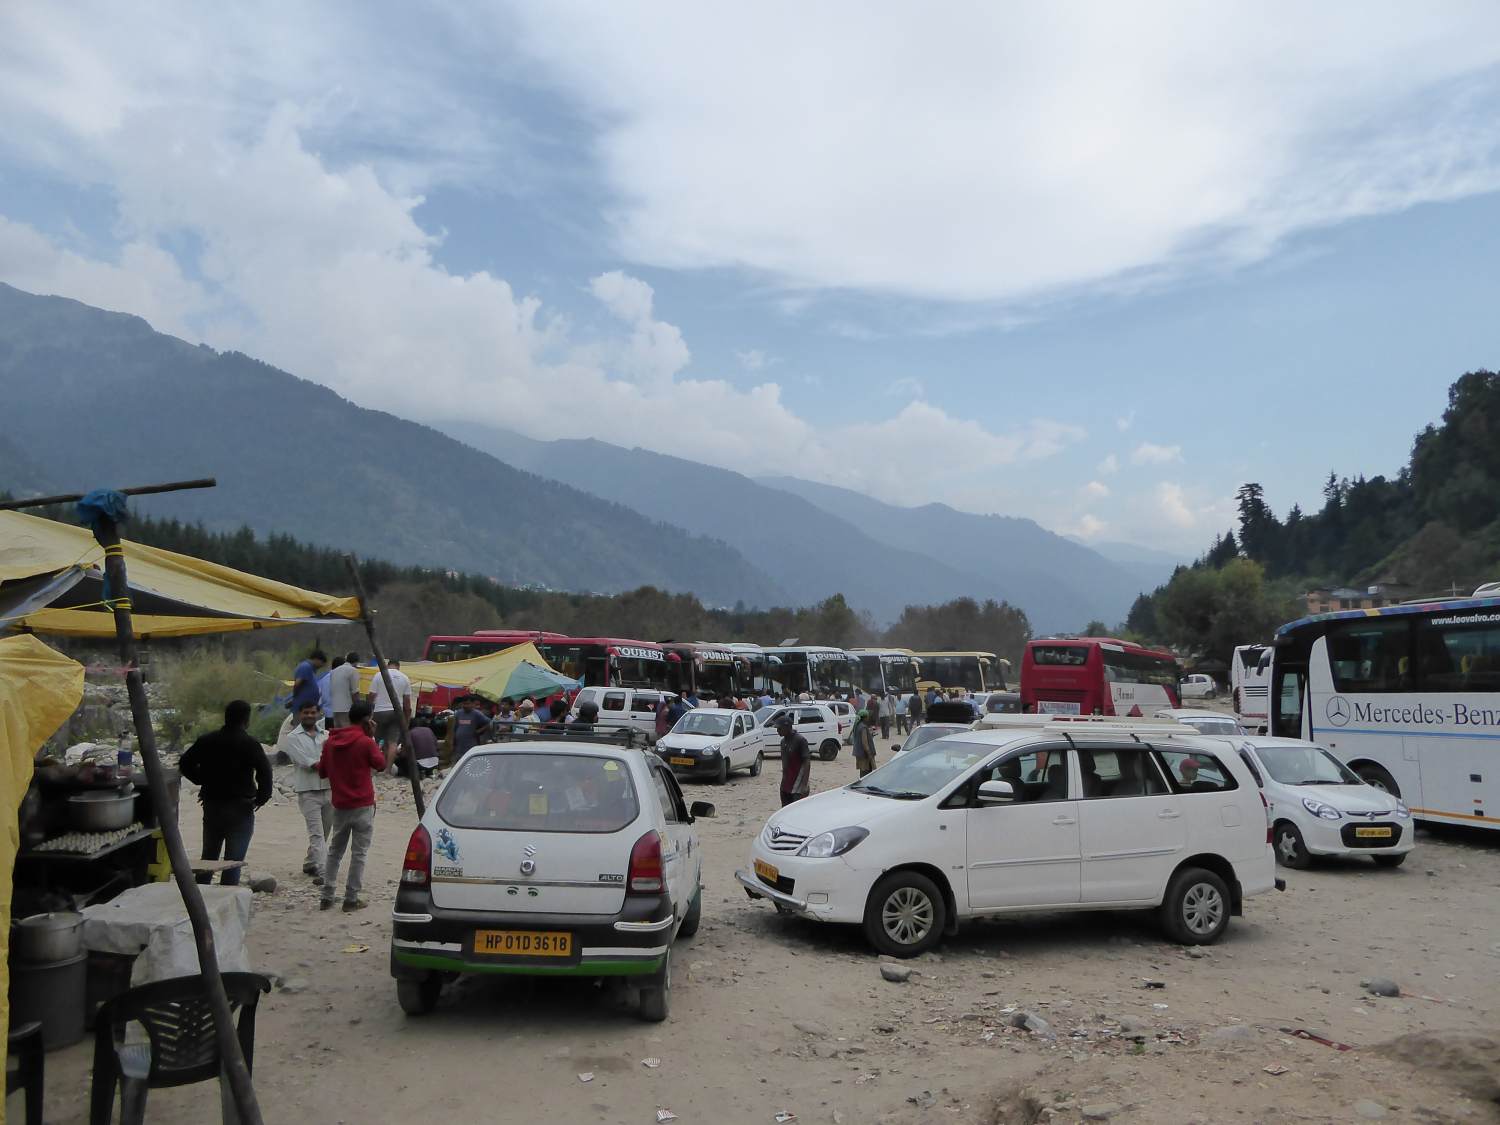 Bus station in Manali